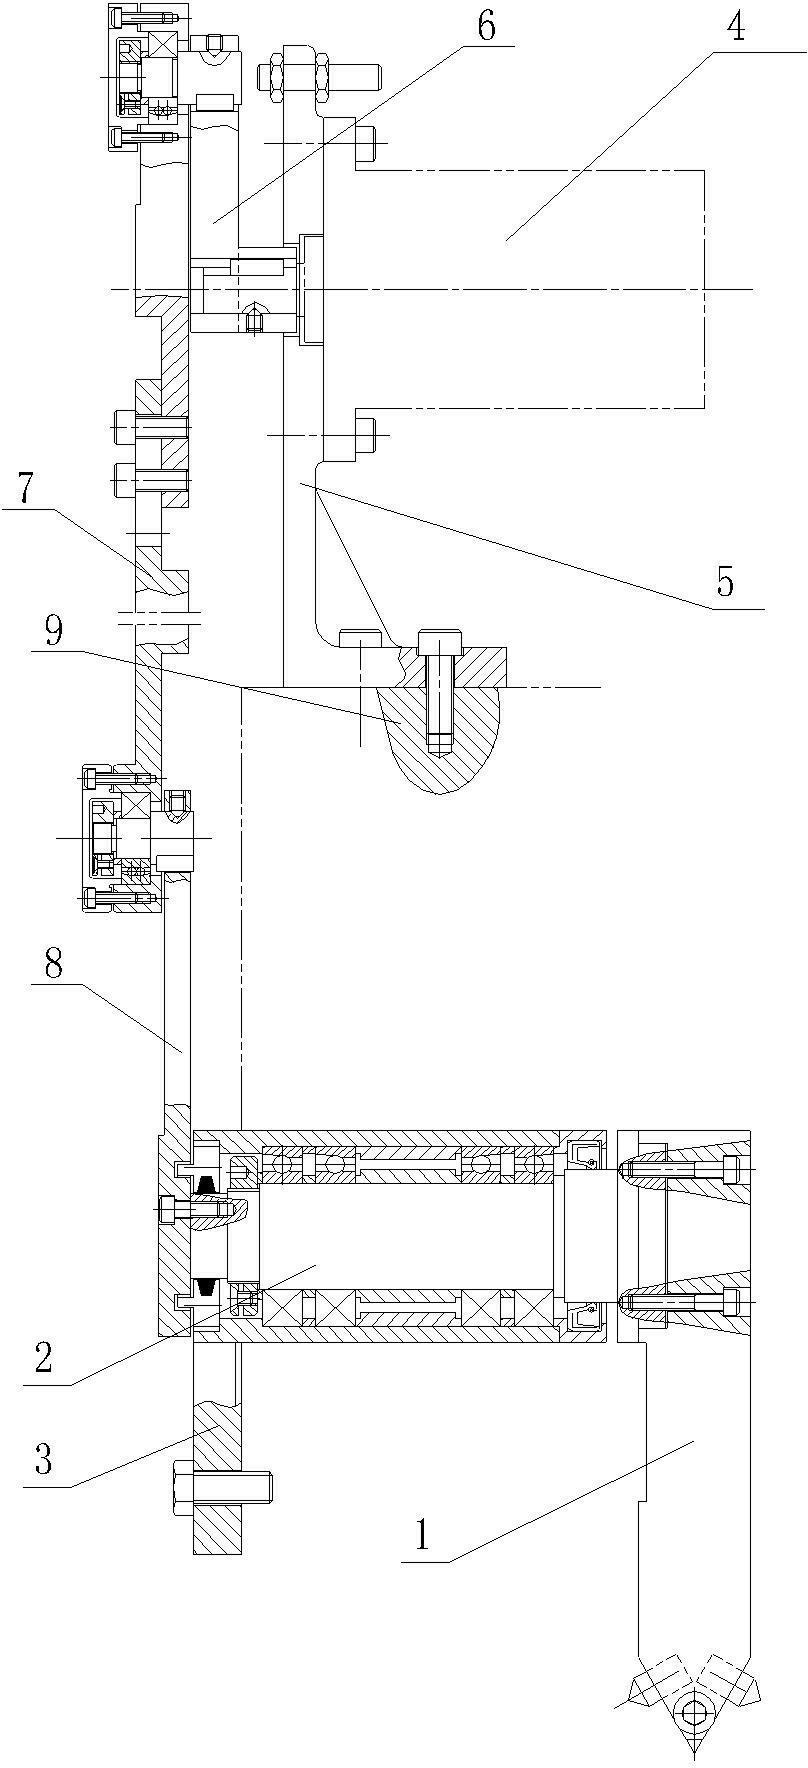 Power input connecting structure for special dresser of vertical shaft double-end surface grinding machine